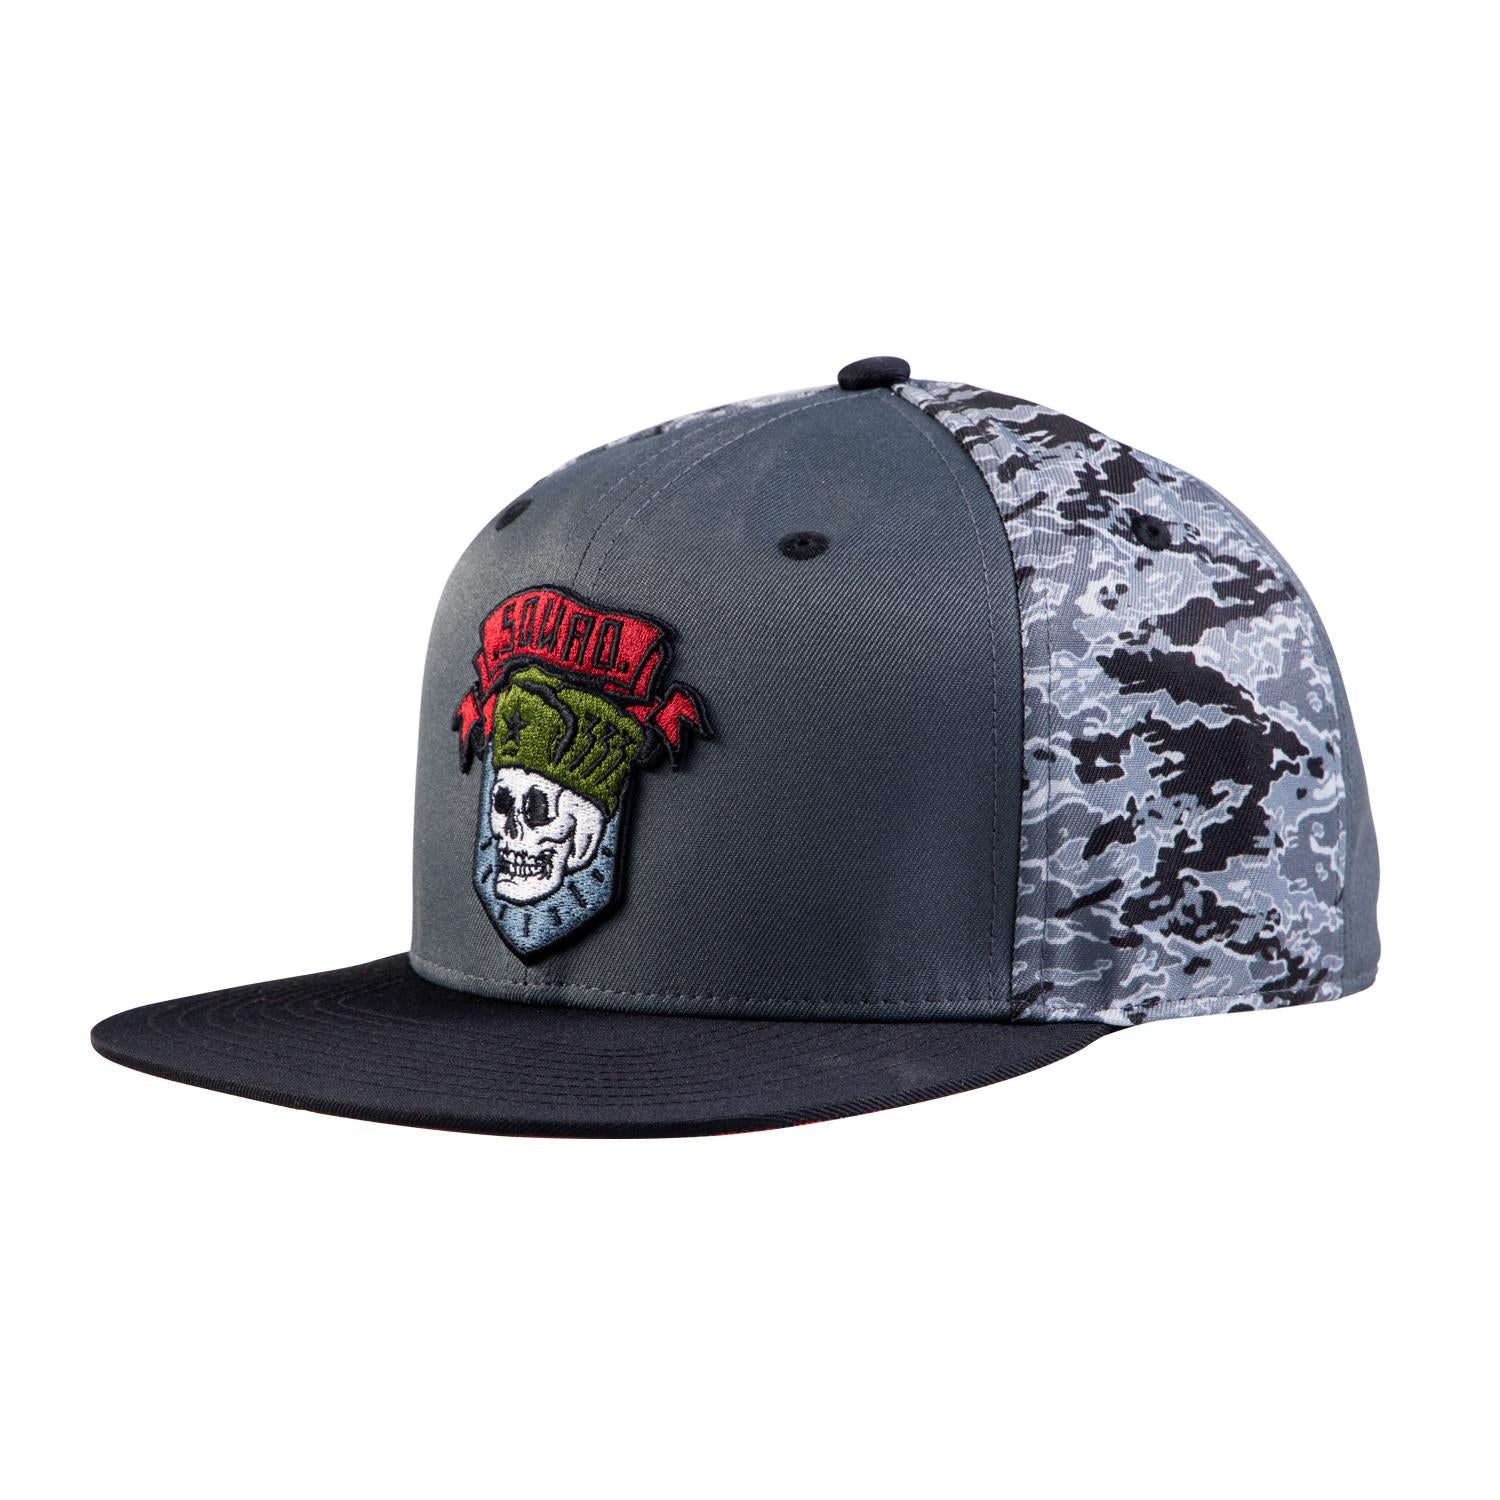 call of duty: black ops cold war "squad patch" snapback cap (online only)